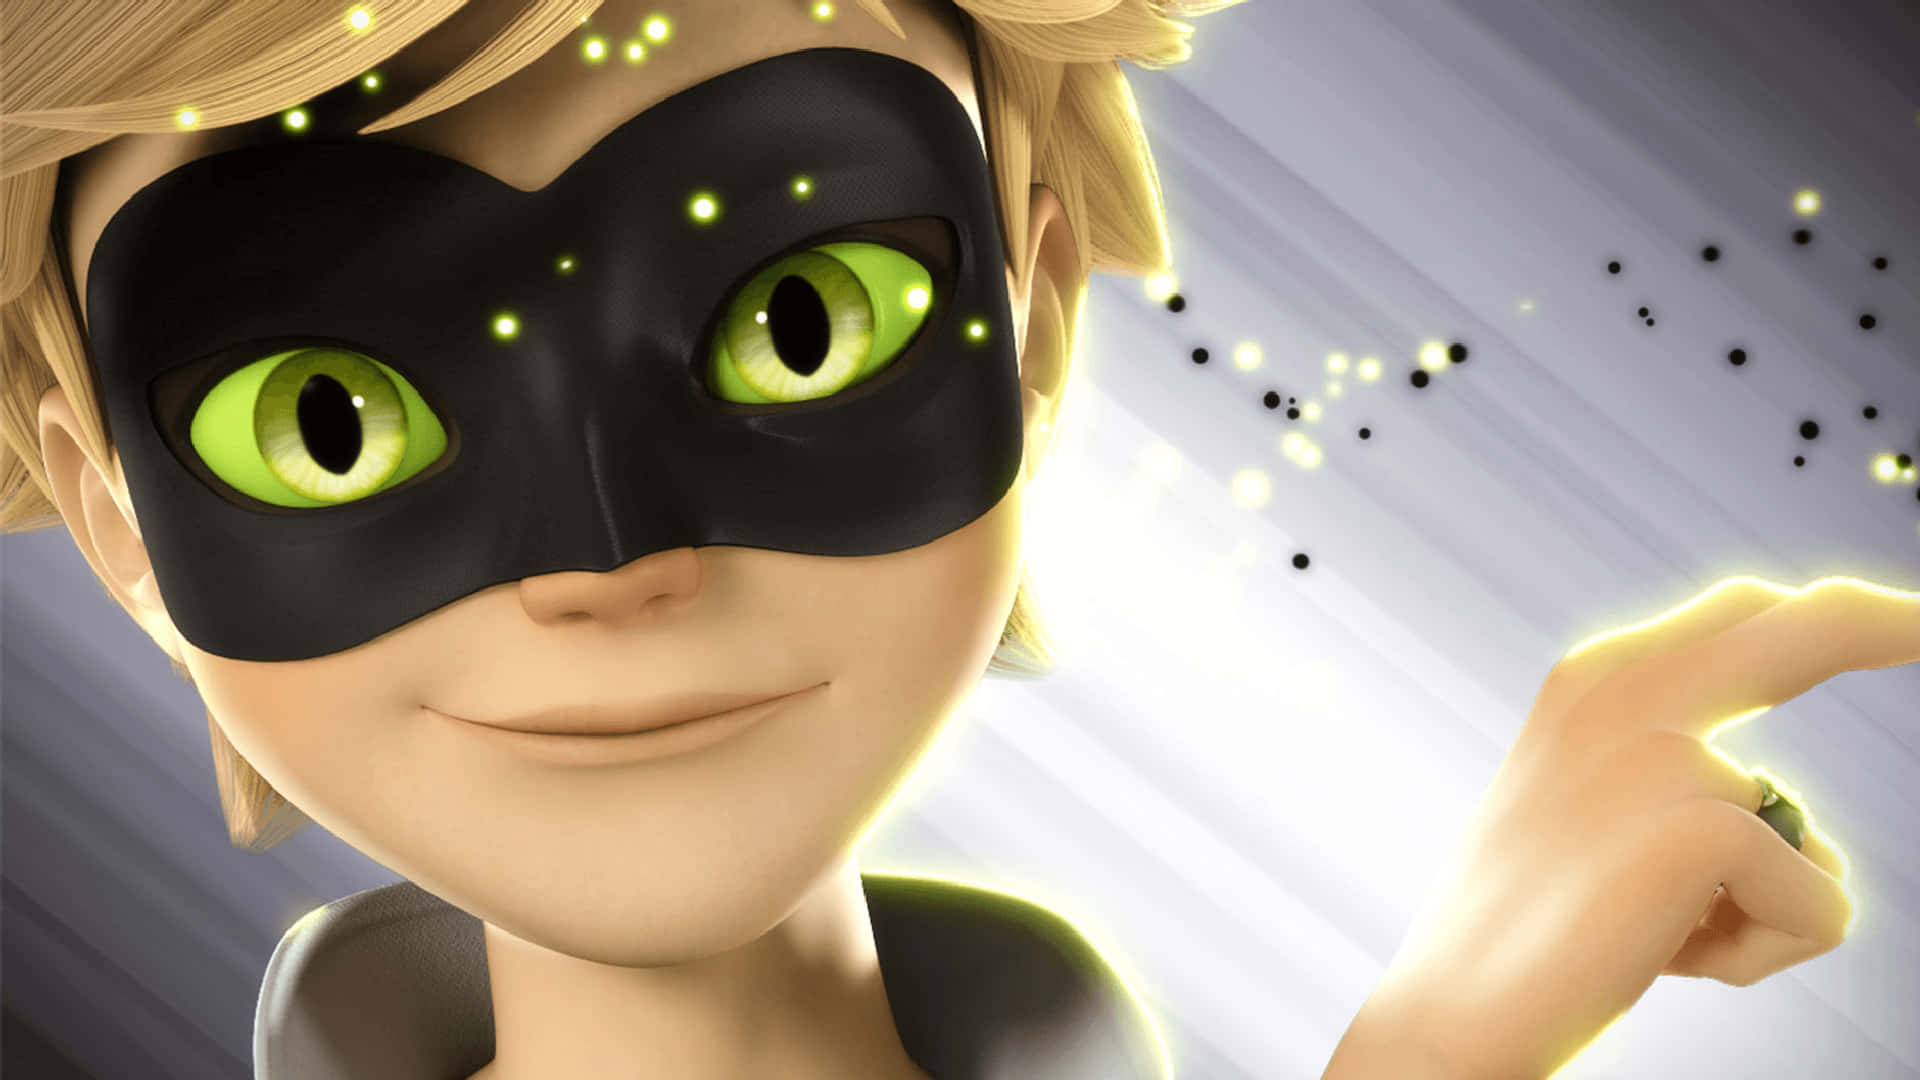 A Cartoon Character With A Mask And Green Eyes Wallpaper